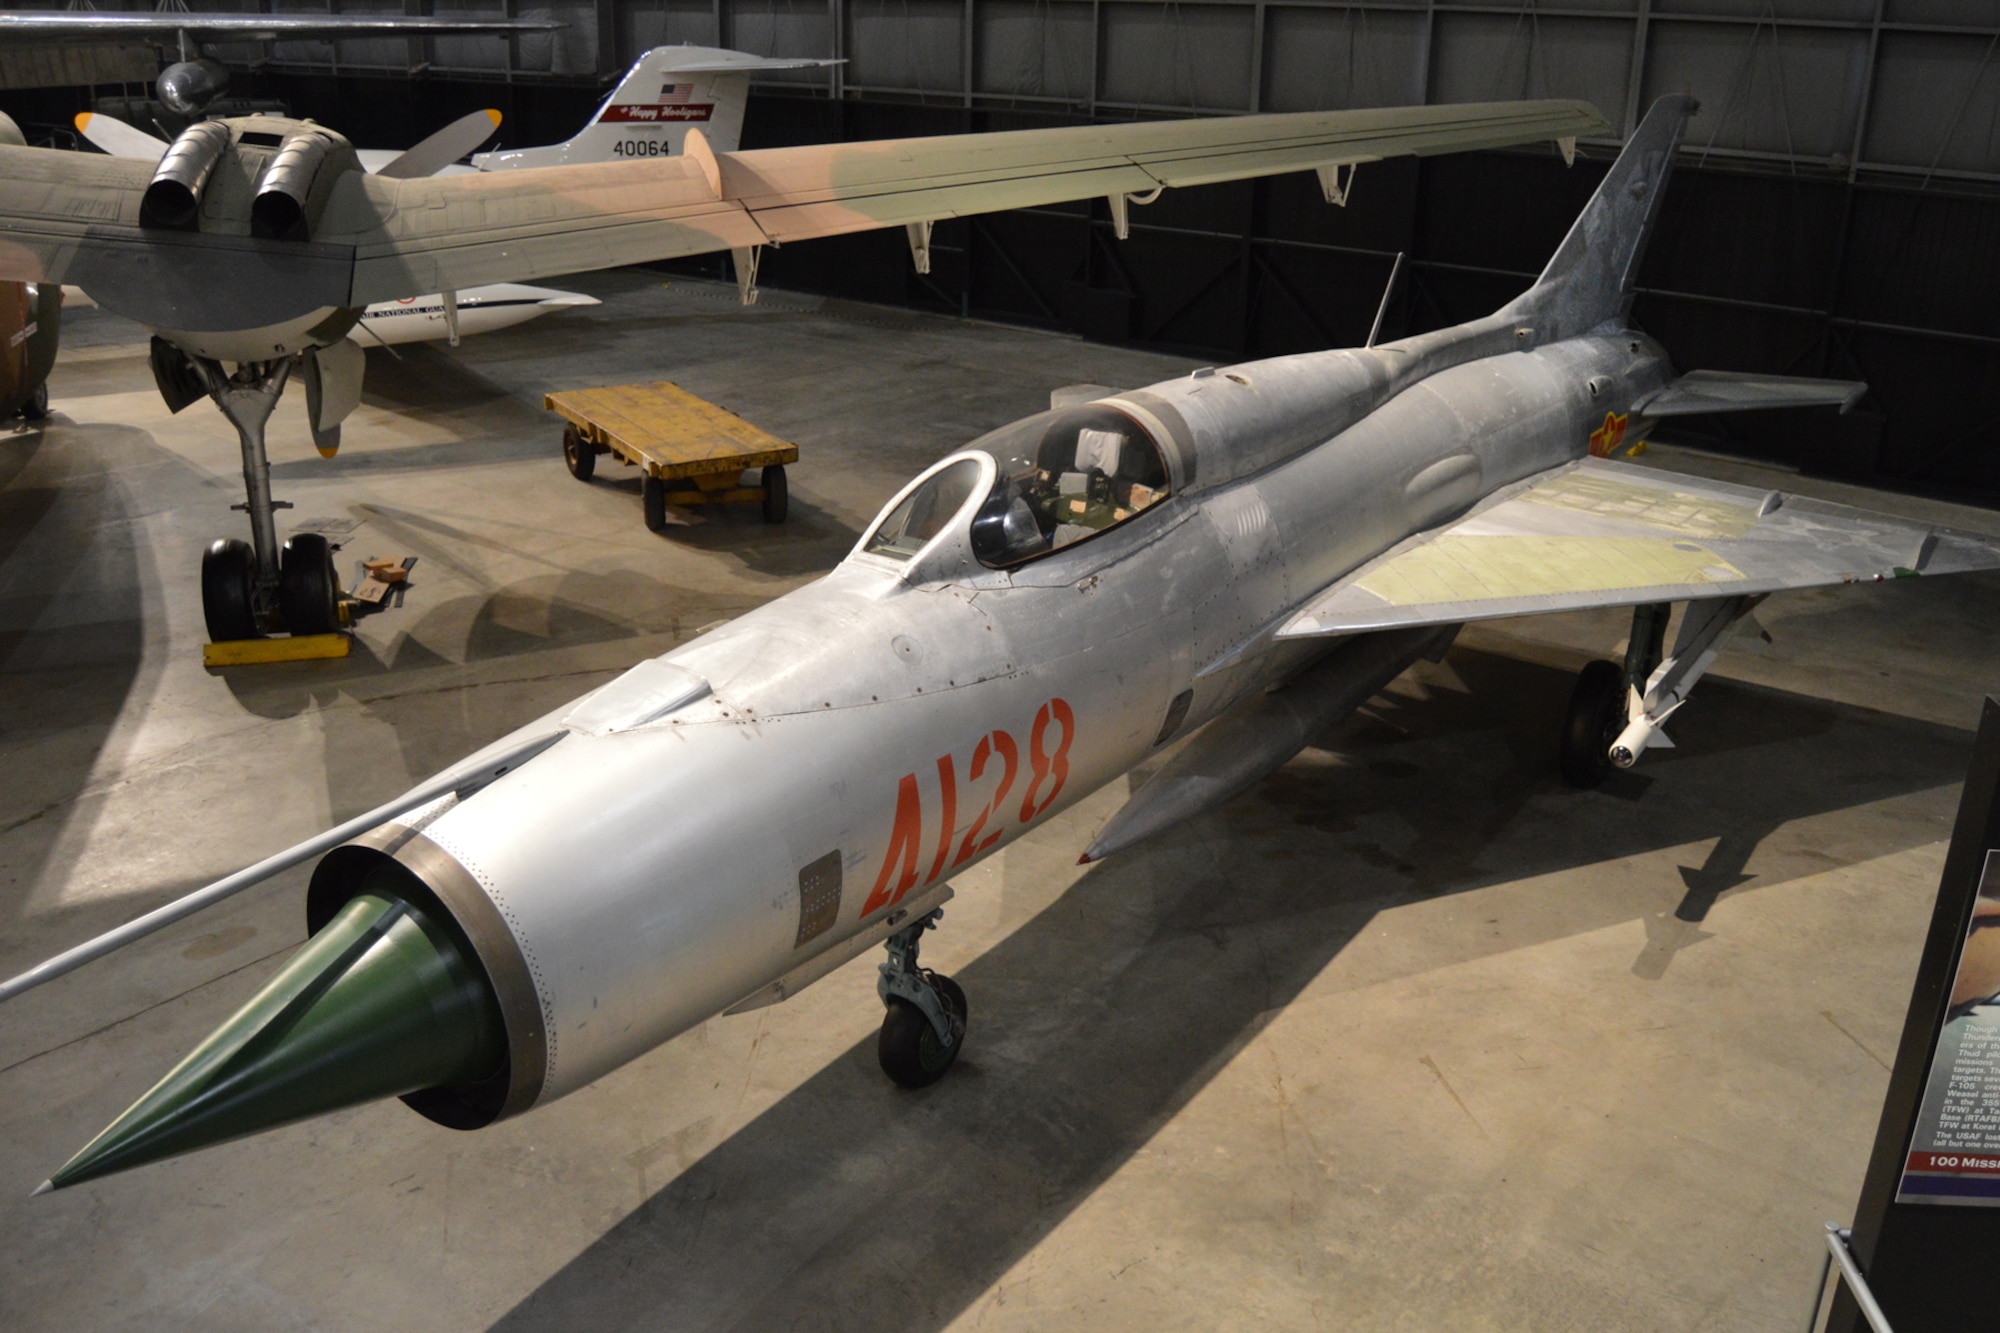 DAYTON, Ohio -- Mikoyan-Gurevich MiG-21PF in the Southeast Asia War Gallery at the National Museum of the U.S. Air Force. (U.S. Air Force Photo)